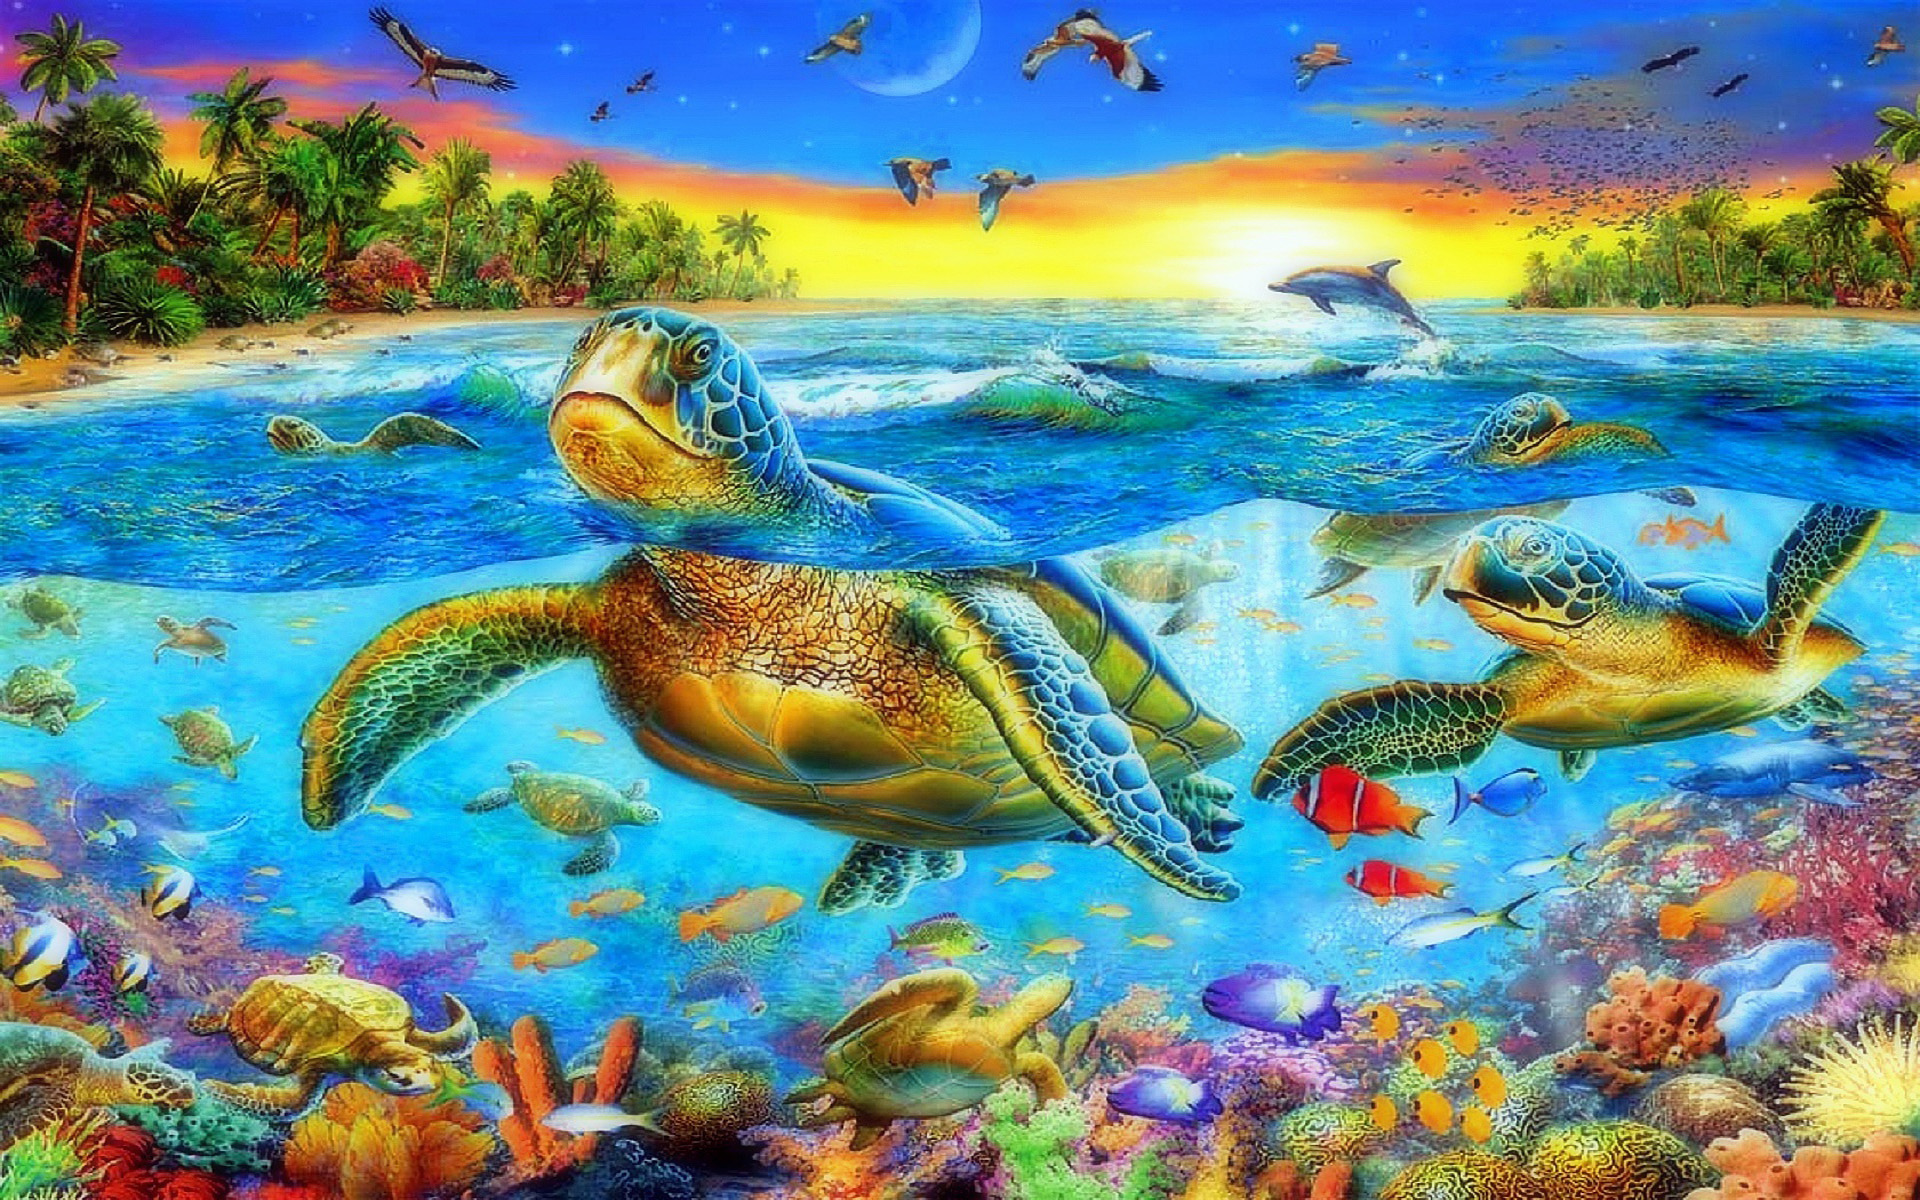 Sea Ocean Sea Turtles Swimming Corals Exotic Colorful Fish Underwater World Tropical Landscape Art HD Wallpaper For Mobile Phones Tablet And Lapx1200, Wallpaper13.com